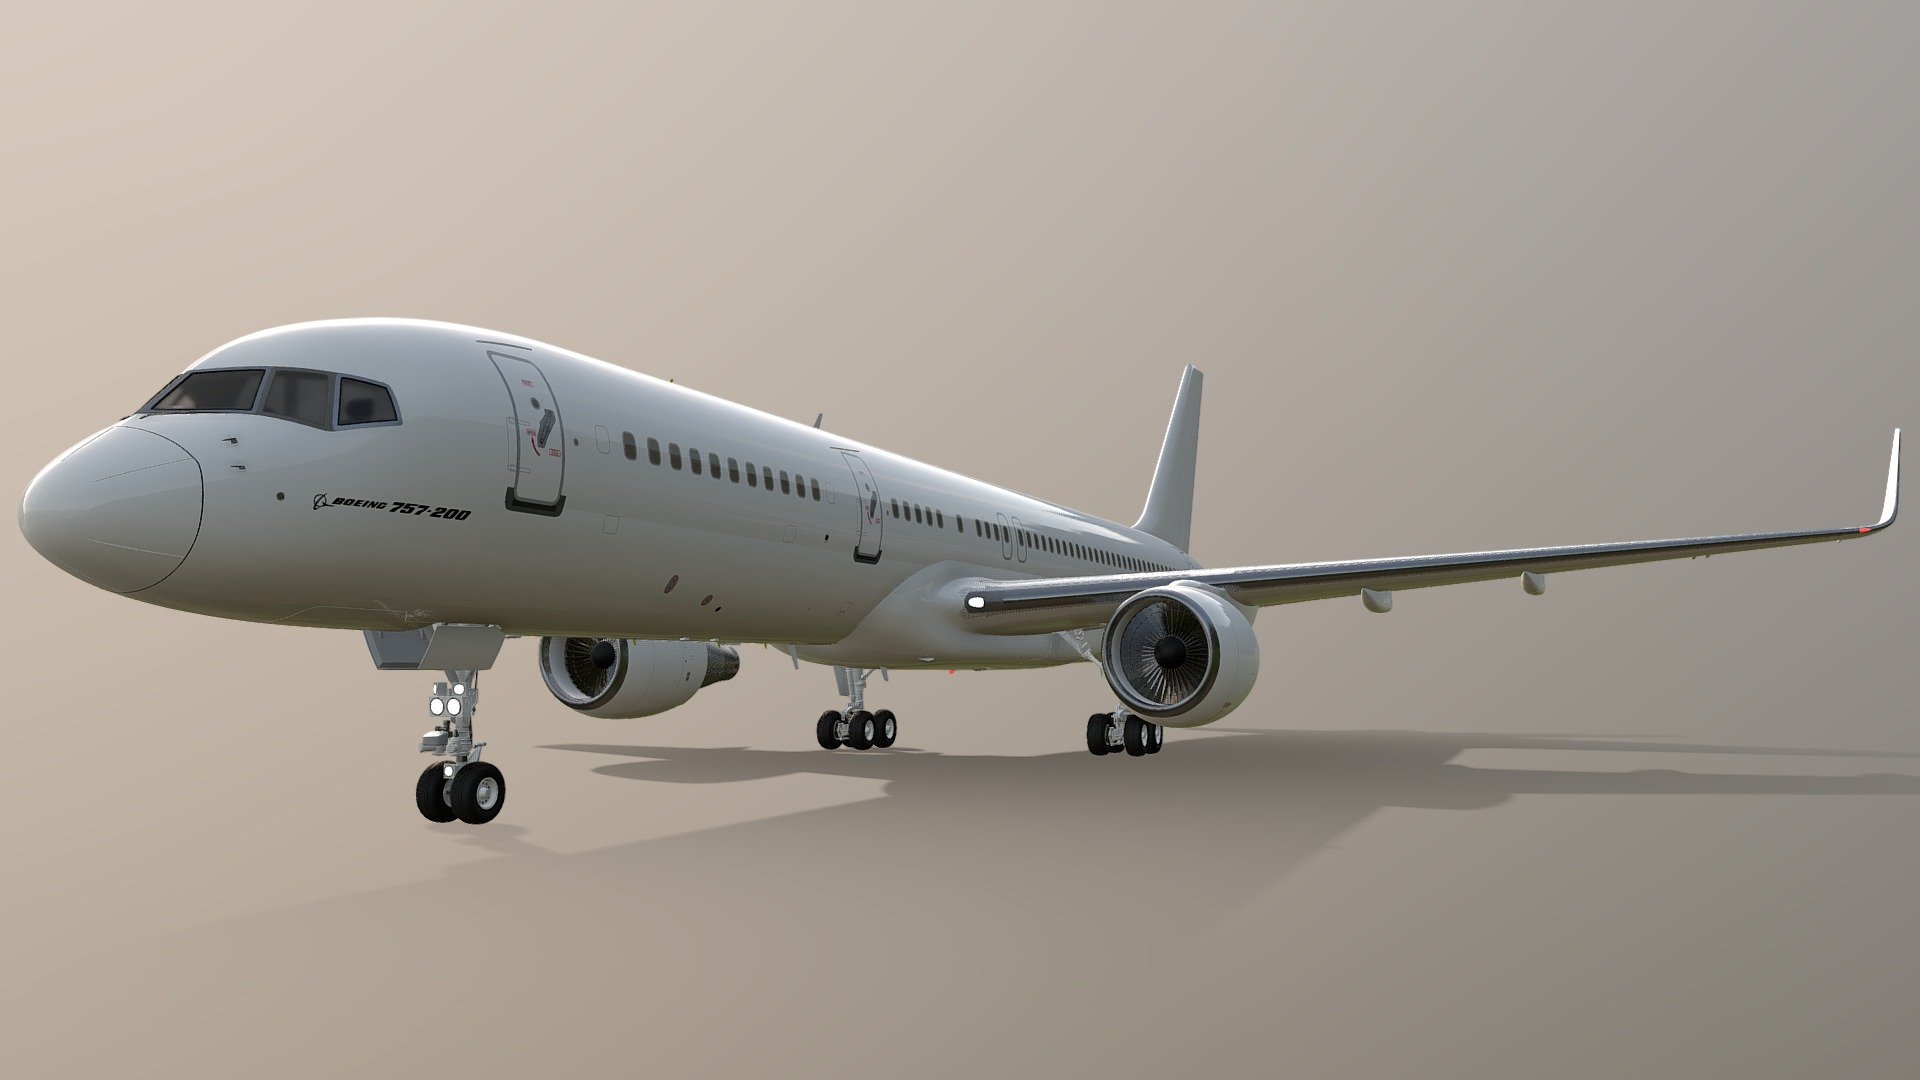 3D model of the Boeing 757-200; in ground position, with winglets, Pratt &amp; Whitney engines, and the alternate two over-the-wing emergency exits configuration.

The Boeing 757 is an American-made, short, medium, and long-range, narrow-body commercial aircraft. It first entered service in 1983, meant to replace the Boeing 727. The production of the 757 ended on October 28, 2004 after 1,050 units had been built.

The 757-200, the original version of the aircraft, is the most widely ordered version of the 757. The 757-300, the stretched version, is the longest narrow-body twinjet ever produced.

The 757 can be considered one of Boeing's most successful models. However, sales fell in the late 90s, causing production to cease. Demand for the 757-200 was continued, primarily due to its usefulness on routes between New York and Western Europe. 

Specifications: Length 155 ft 3 in / 47.3 m Height 44 ft 6 in / 13.6 m Wingspan 124 ft 10 in / 38.0 m (with no winglets) - Boeing 757-200 - Buy Royalty Free 3D model by Fel P (@philpay) 3d model